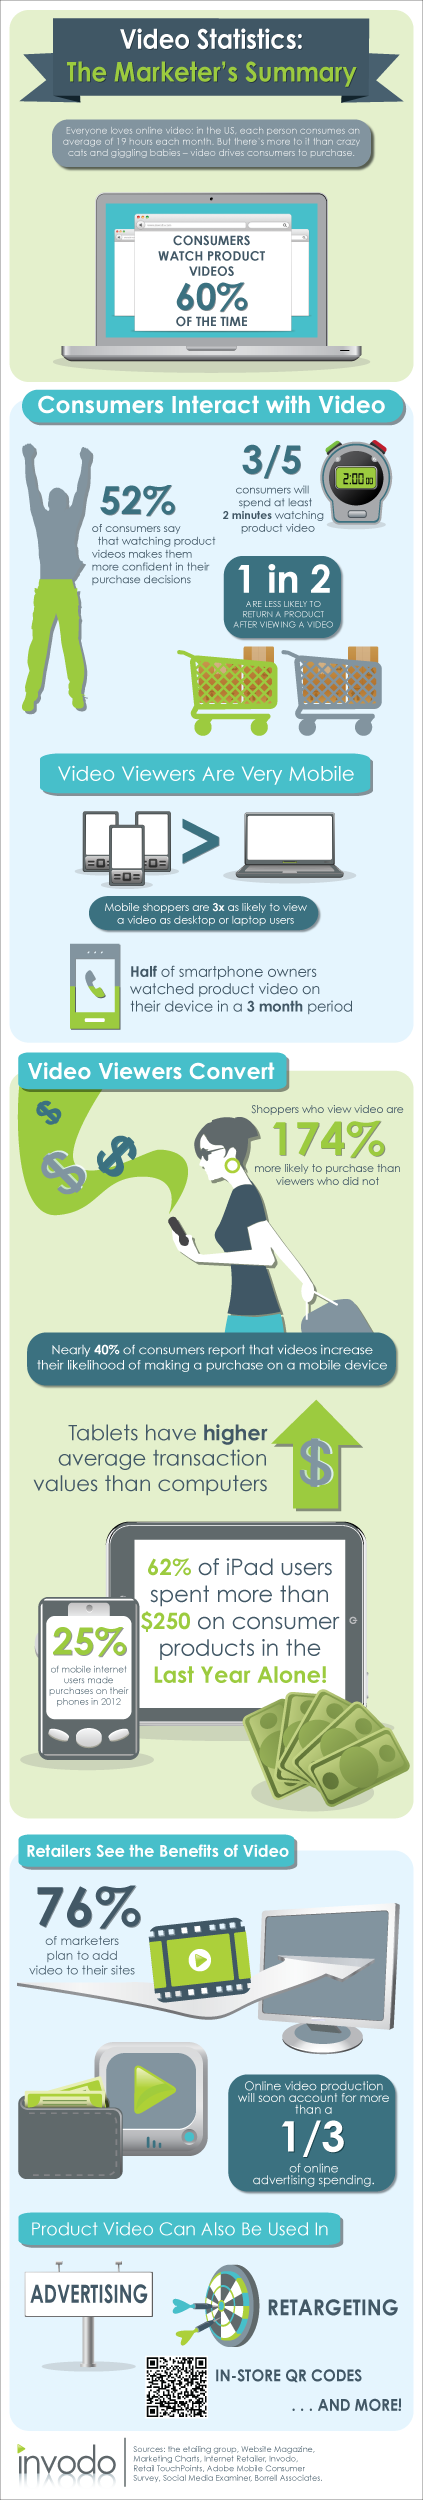 VideoStats_Infographic